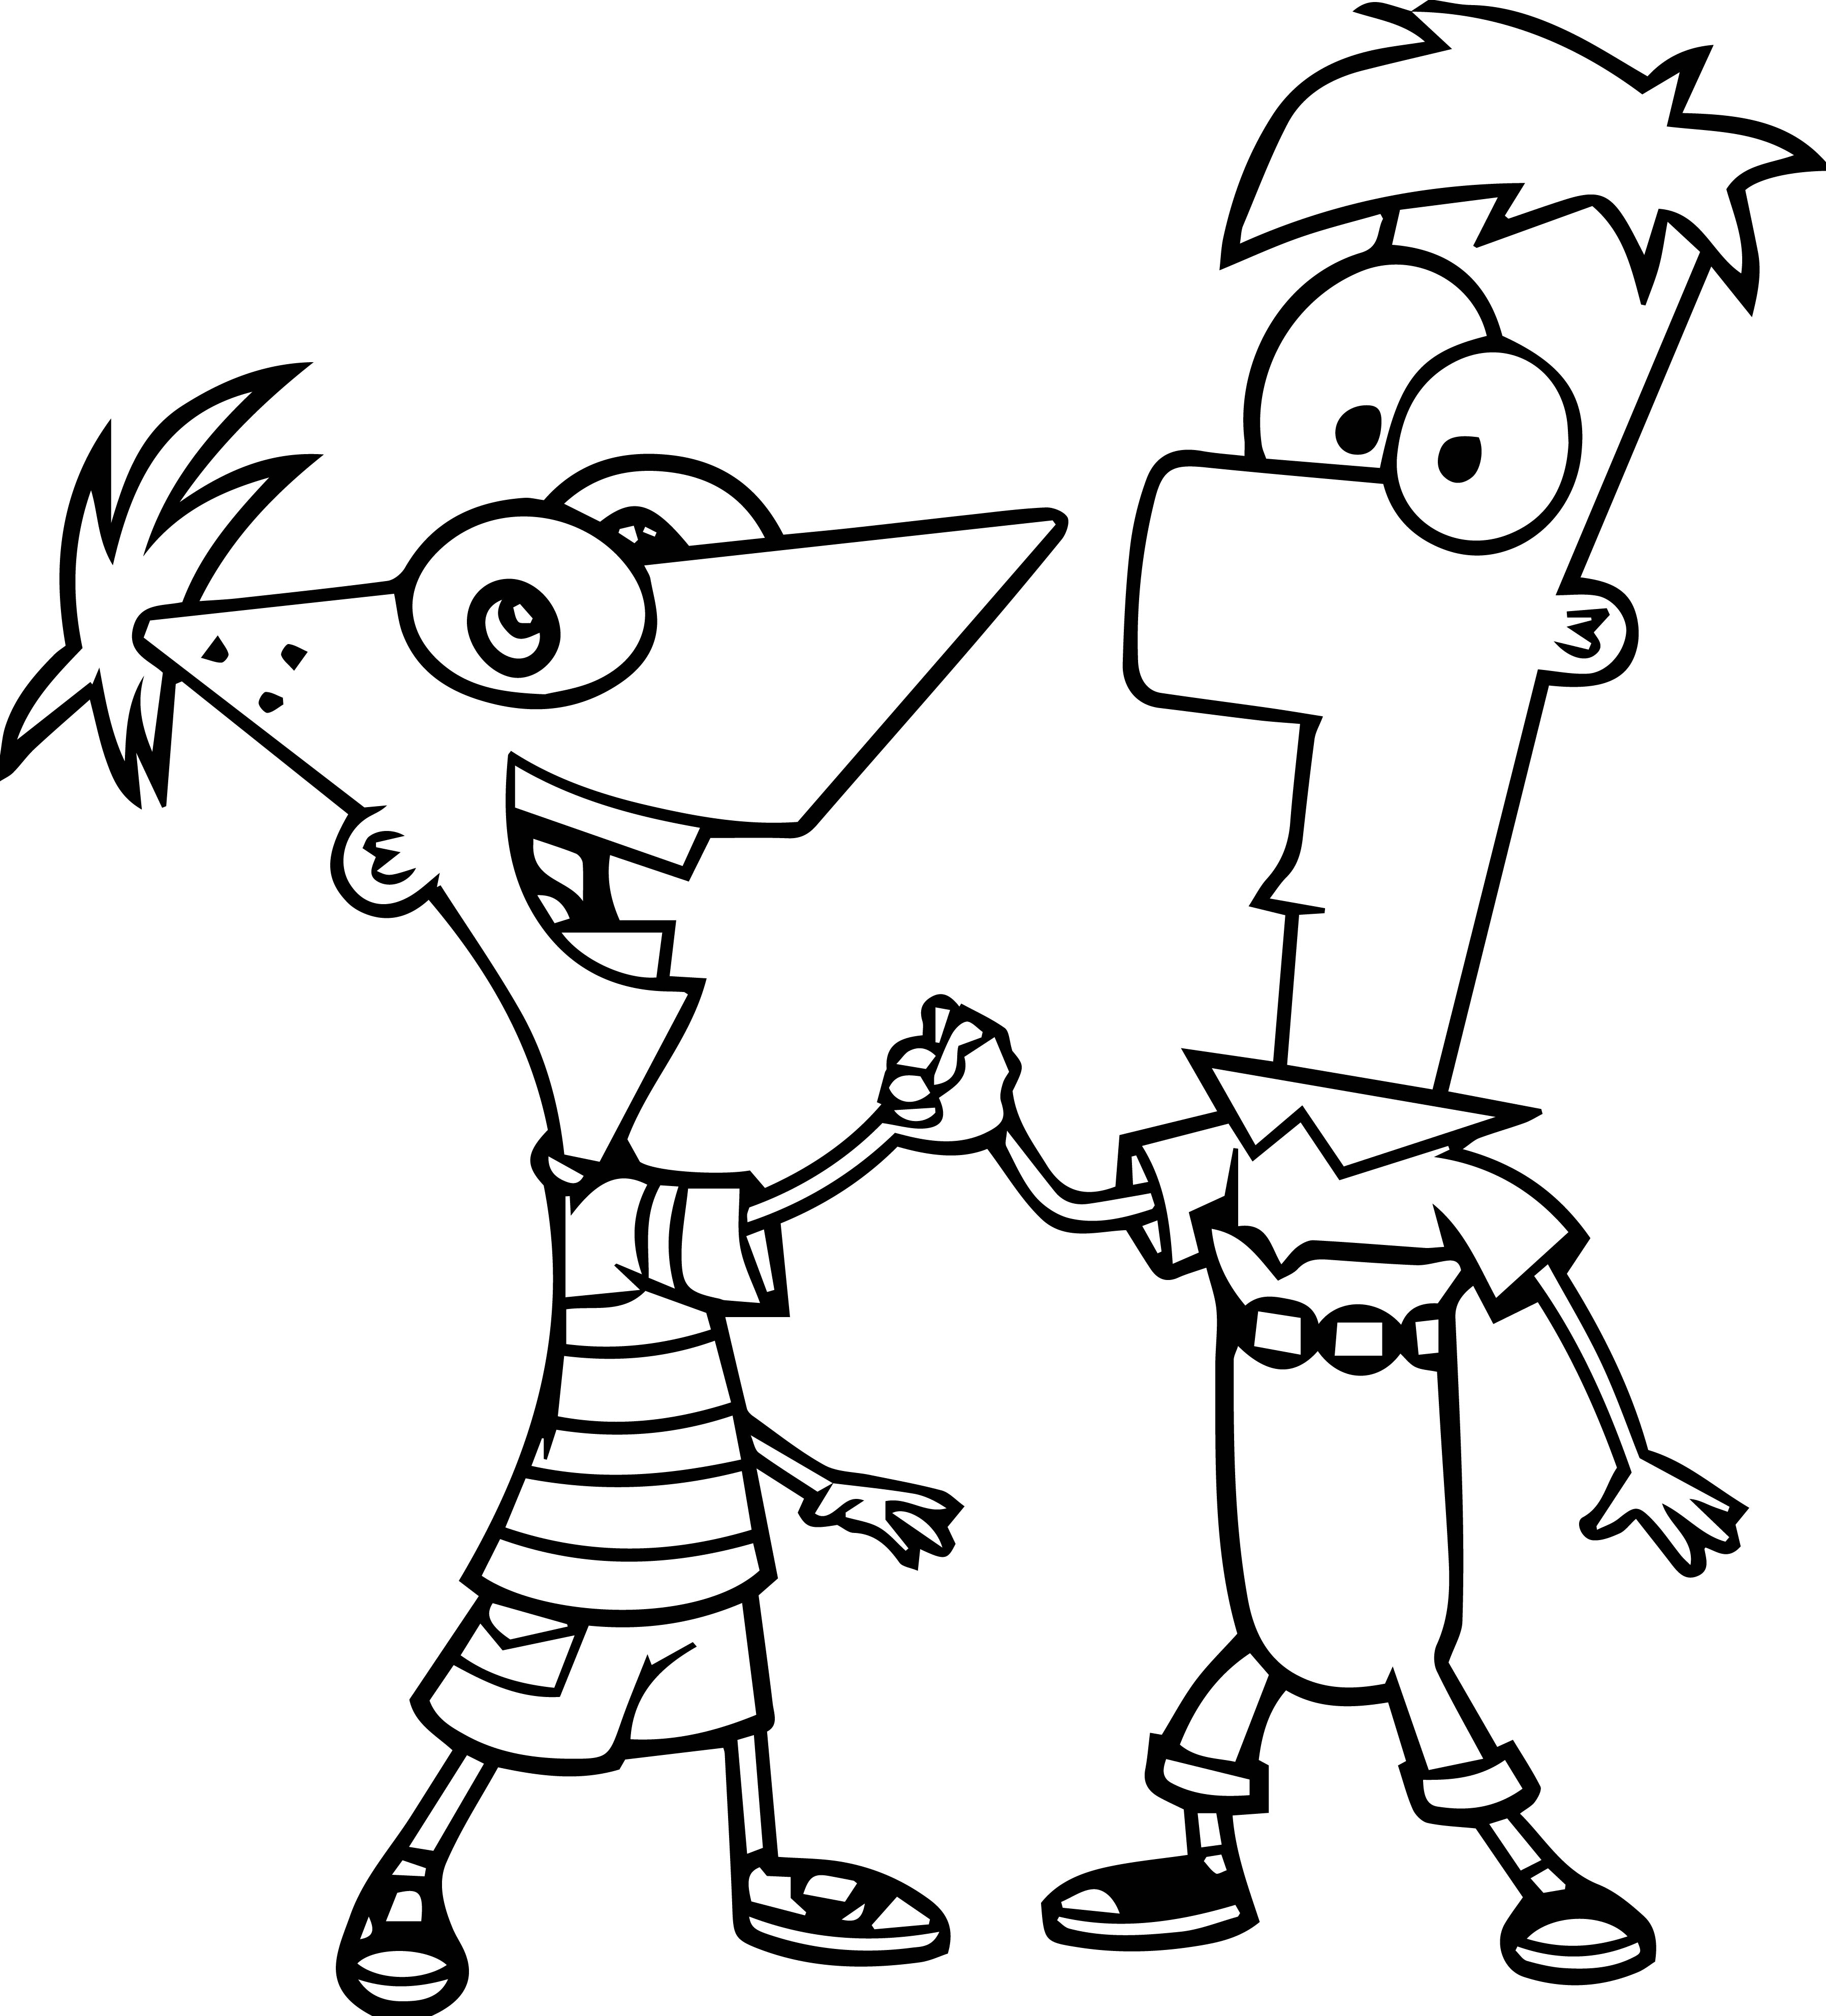 phineas-and-ferb-coloring-pages-to-print-at-getdrawings-free-download